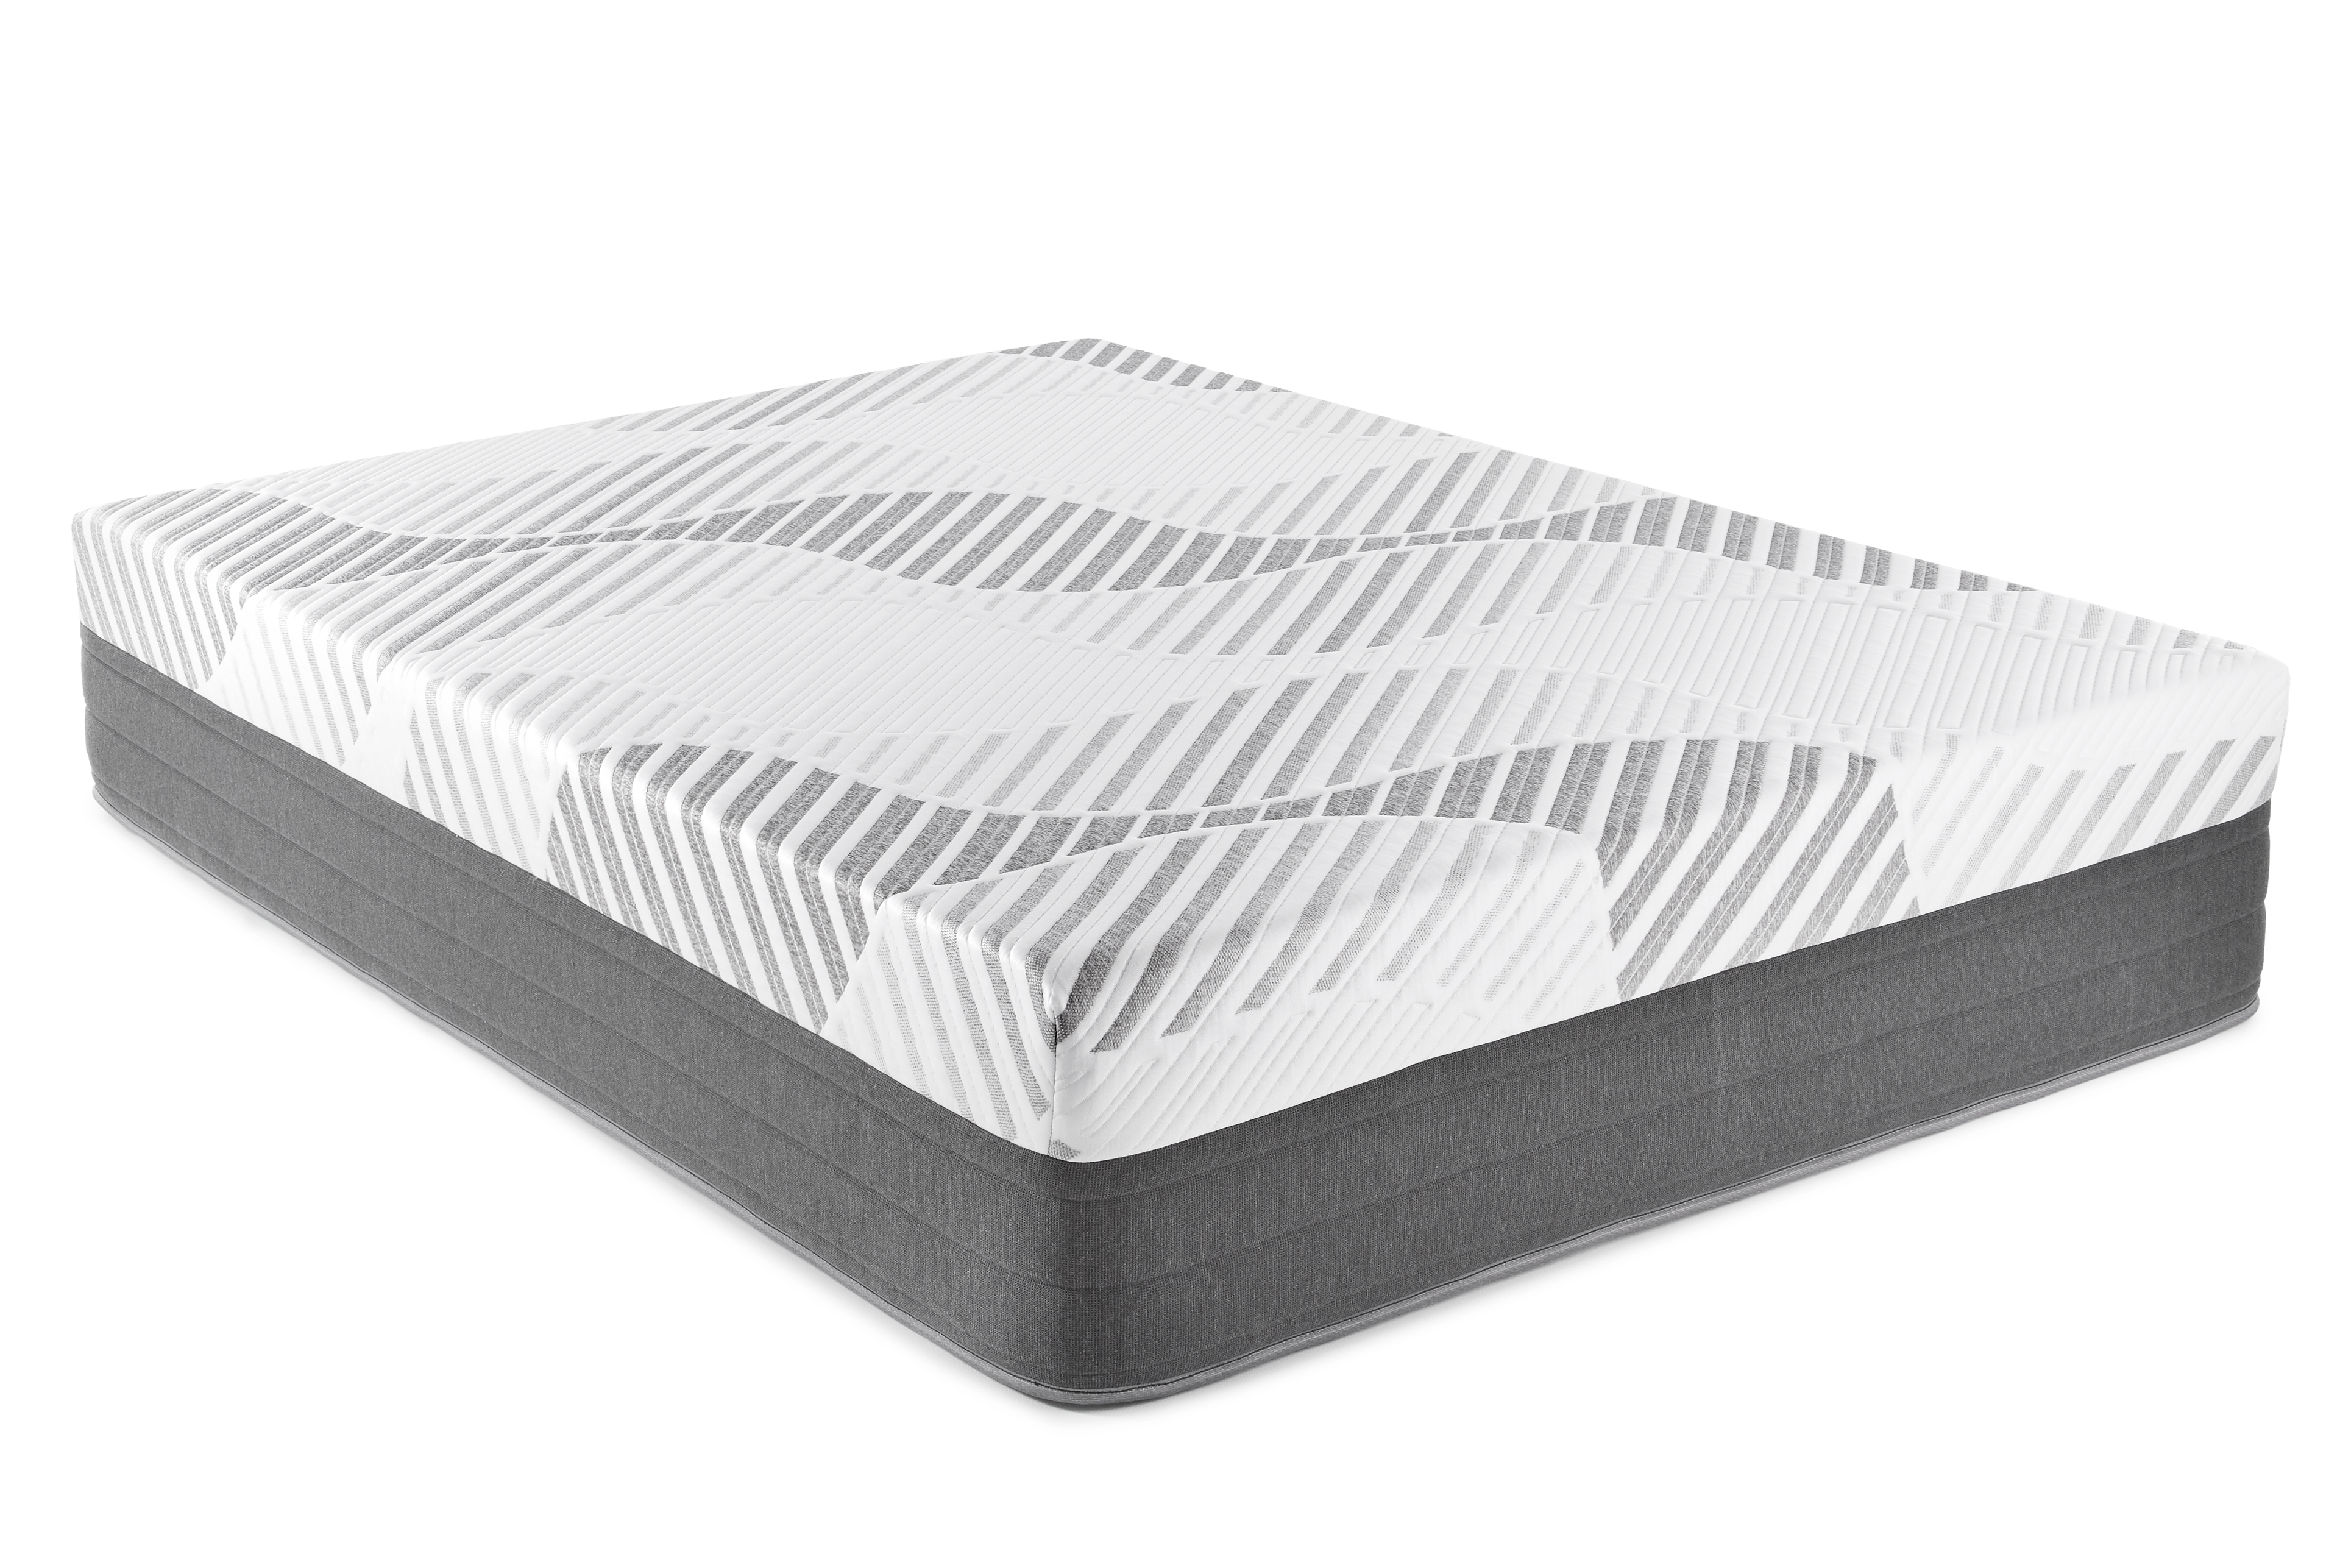 Sopor 14" Luxury Hybrid Mattress complete mattress view with white background. Dark grey side fabric and white dominant top fabric with grey pattern. Smooth tight top mattress without stitched welt quilting.